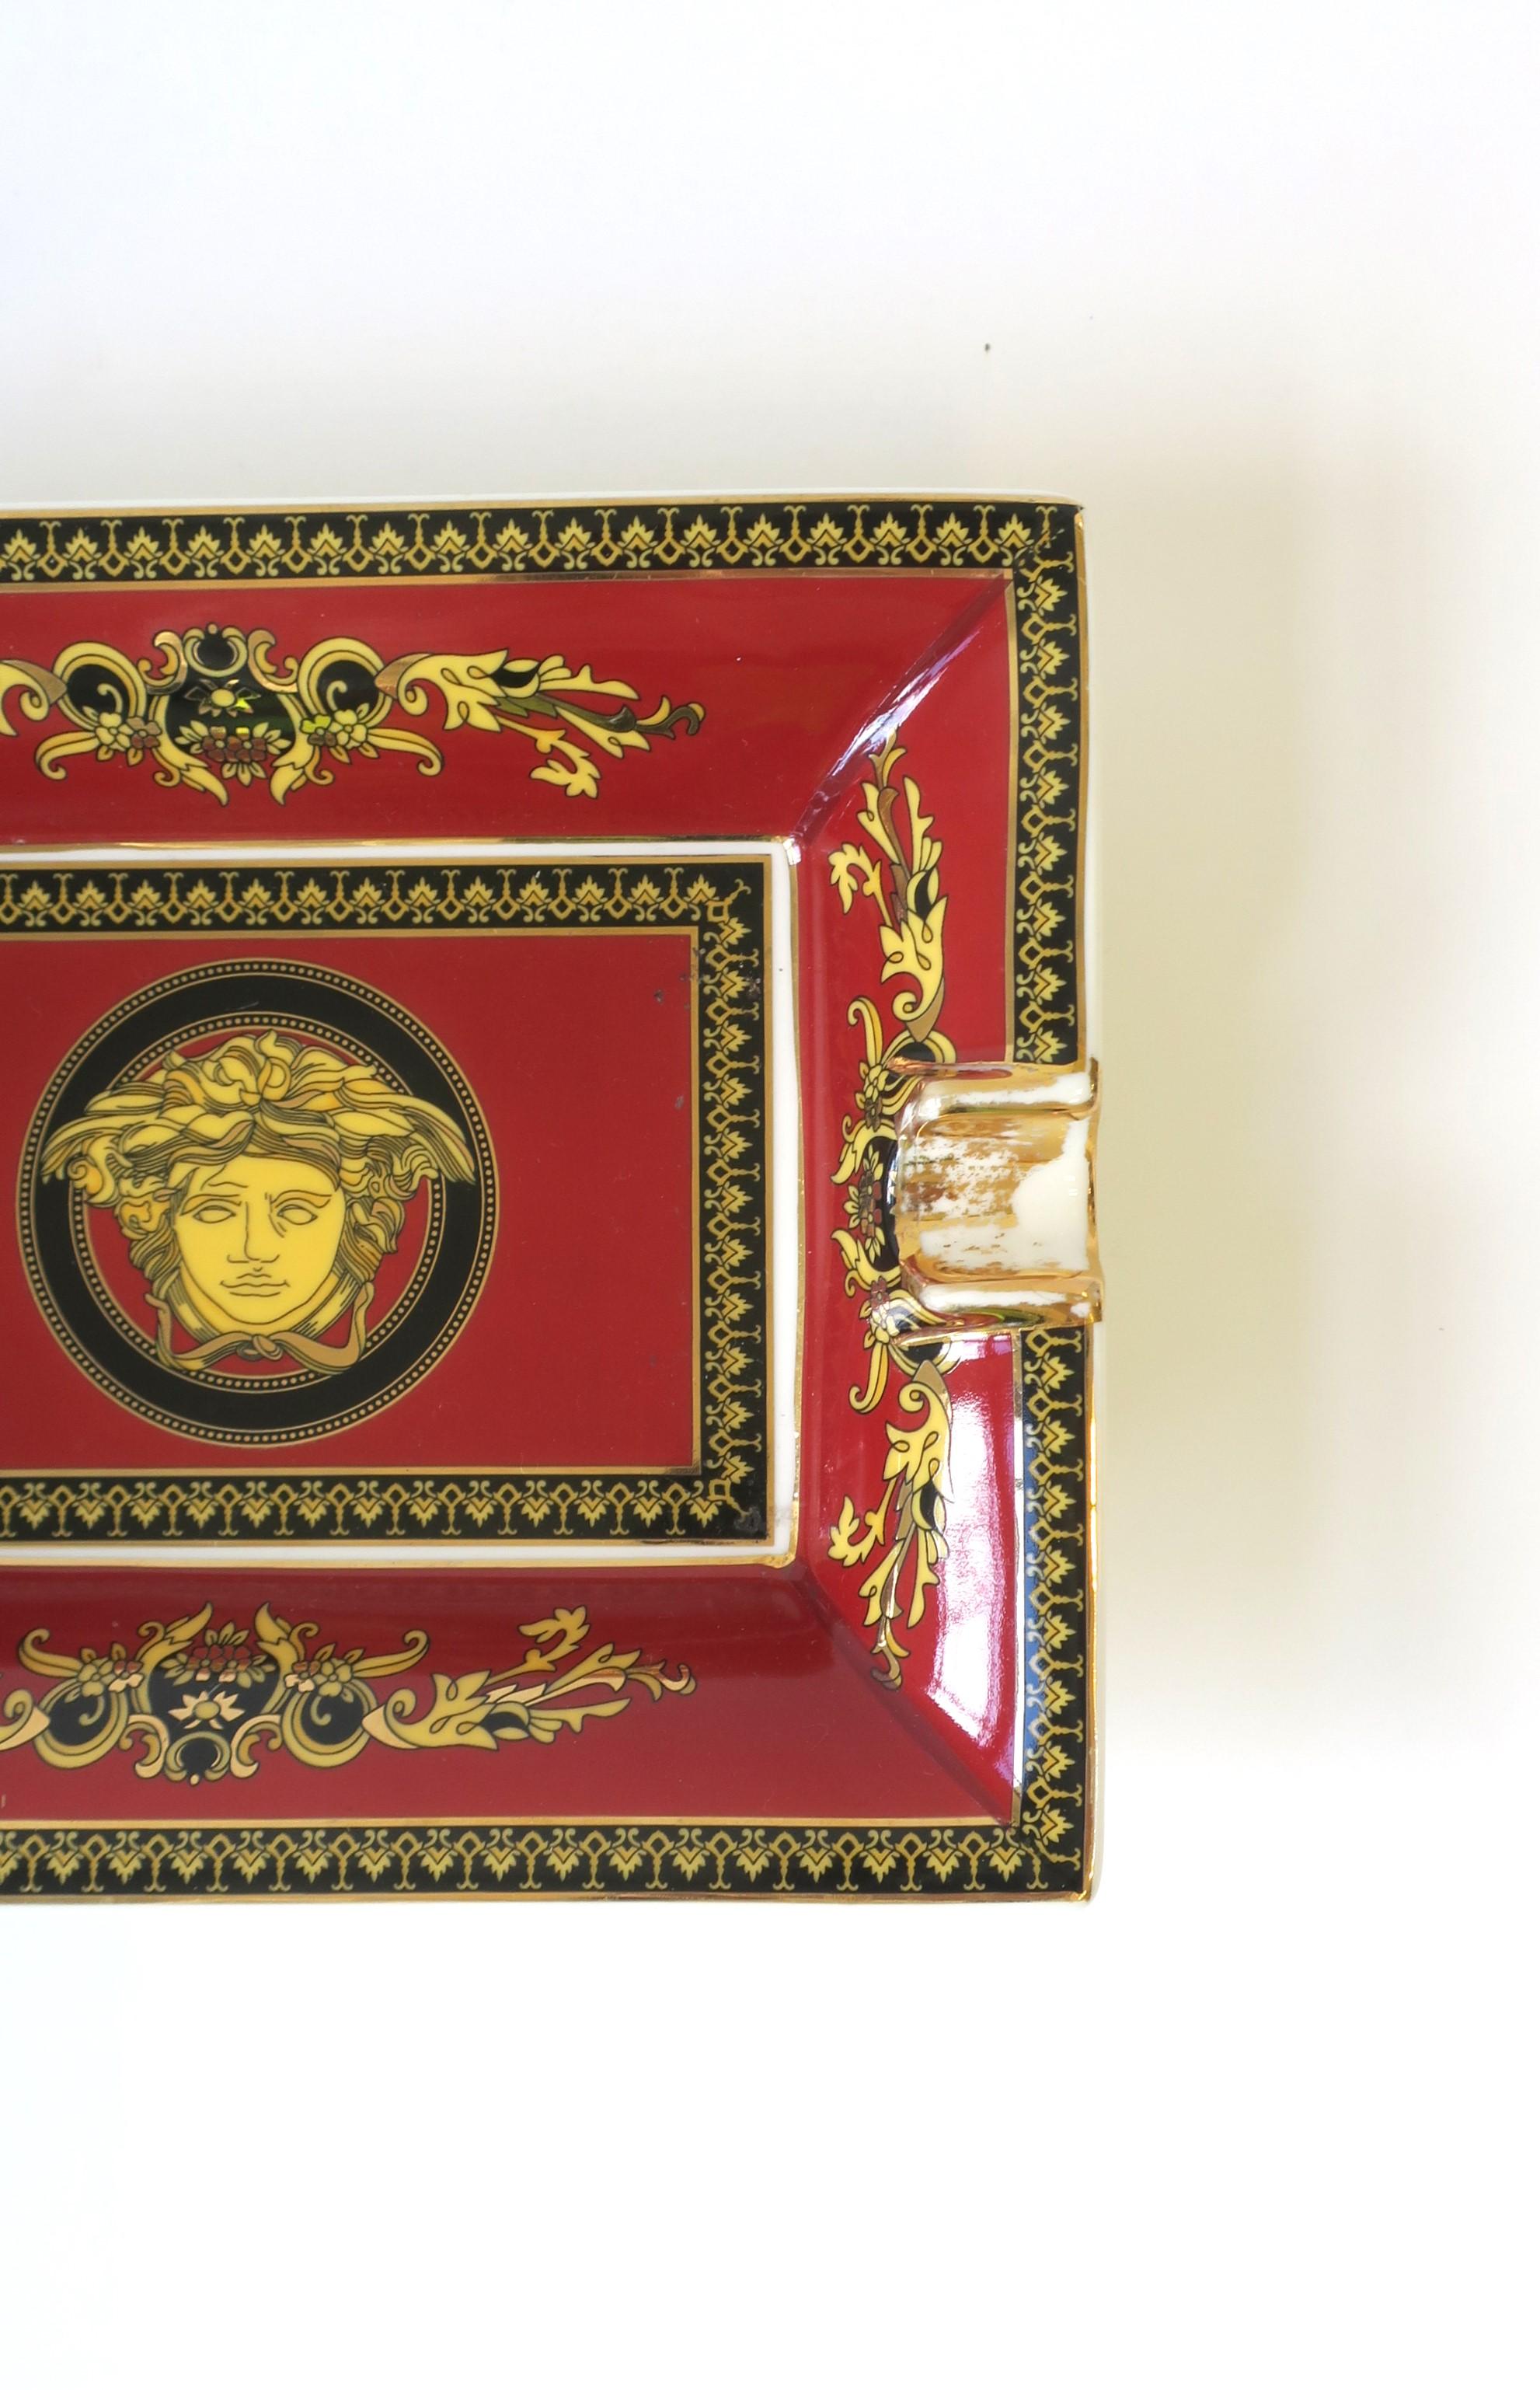 Versace Medusa Porcelain Catchall Tray Dish or Ashtray in Red Burgundy & Gold 1